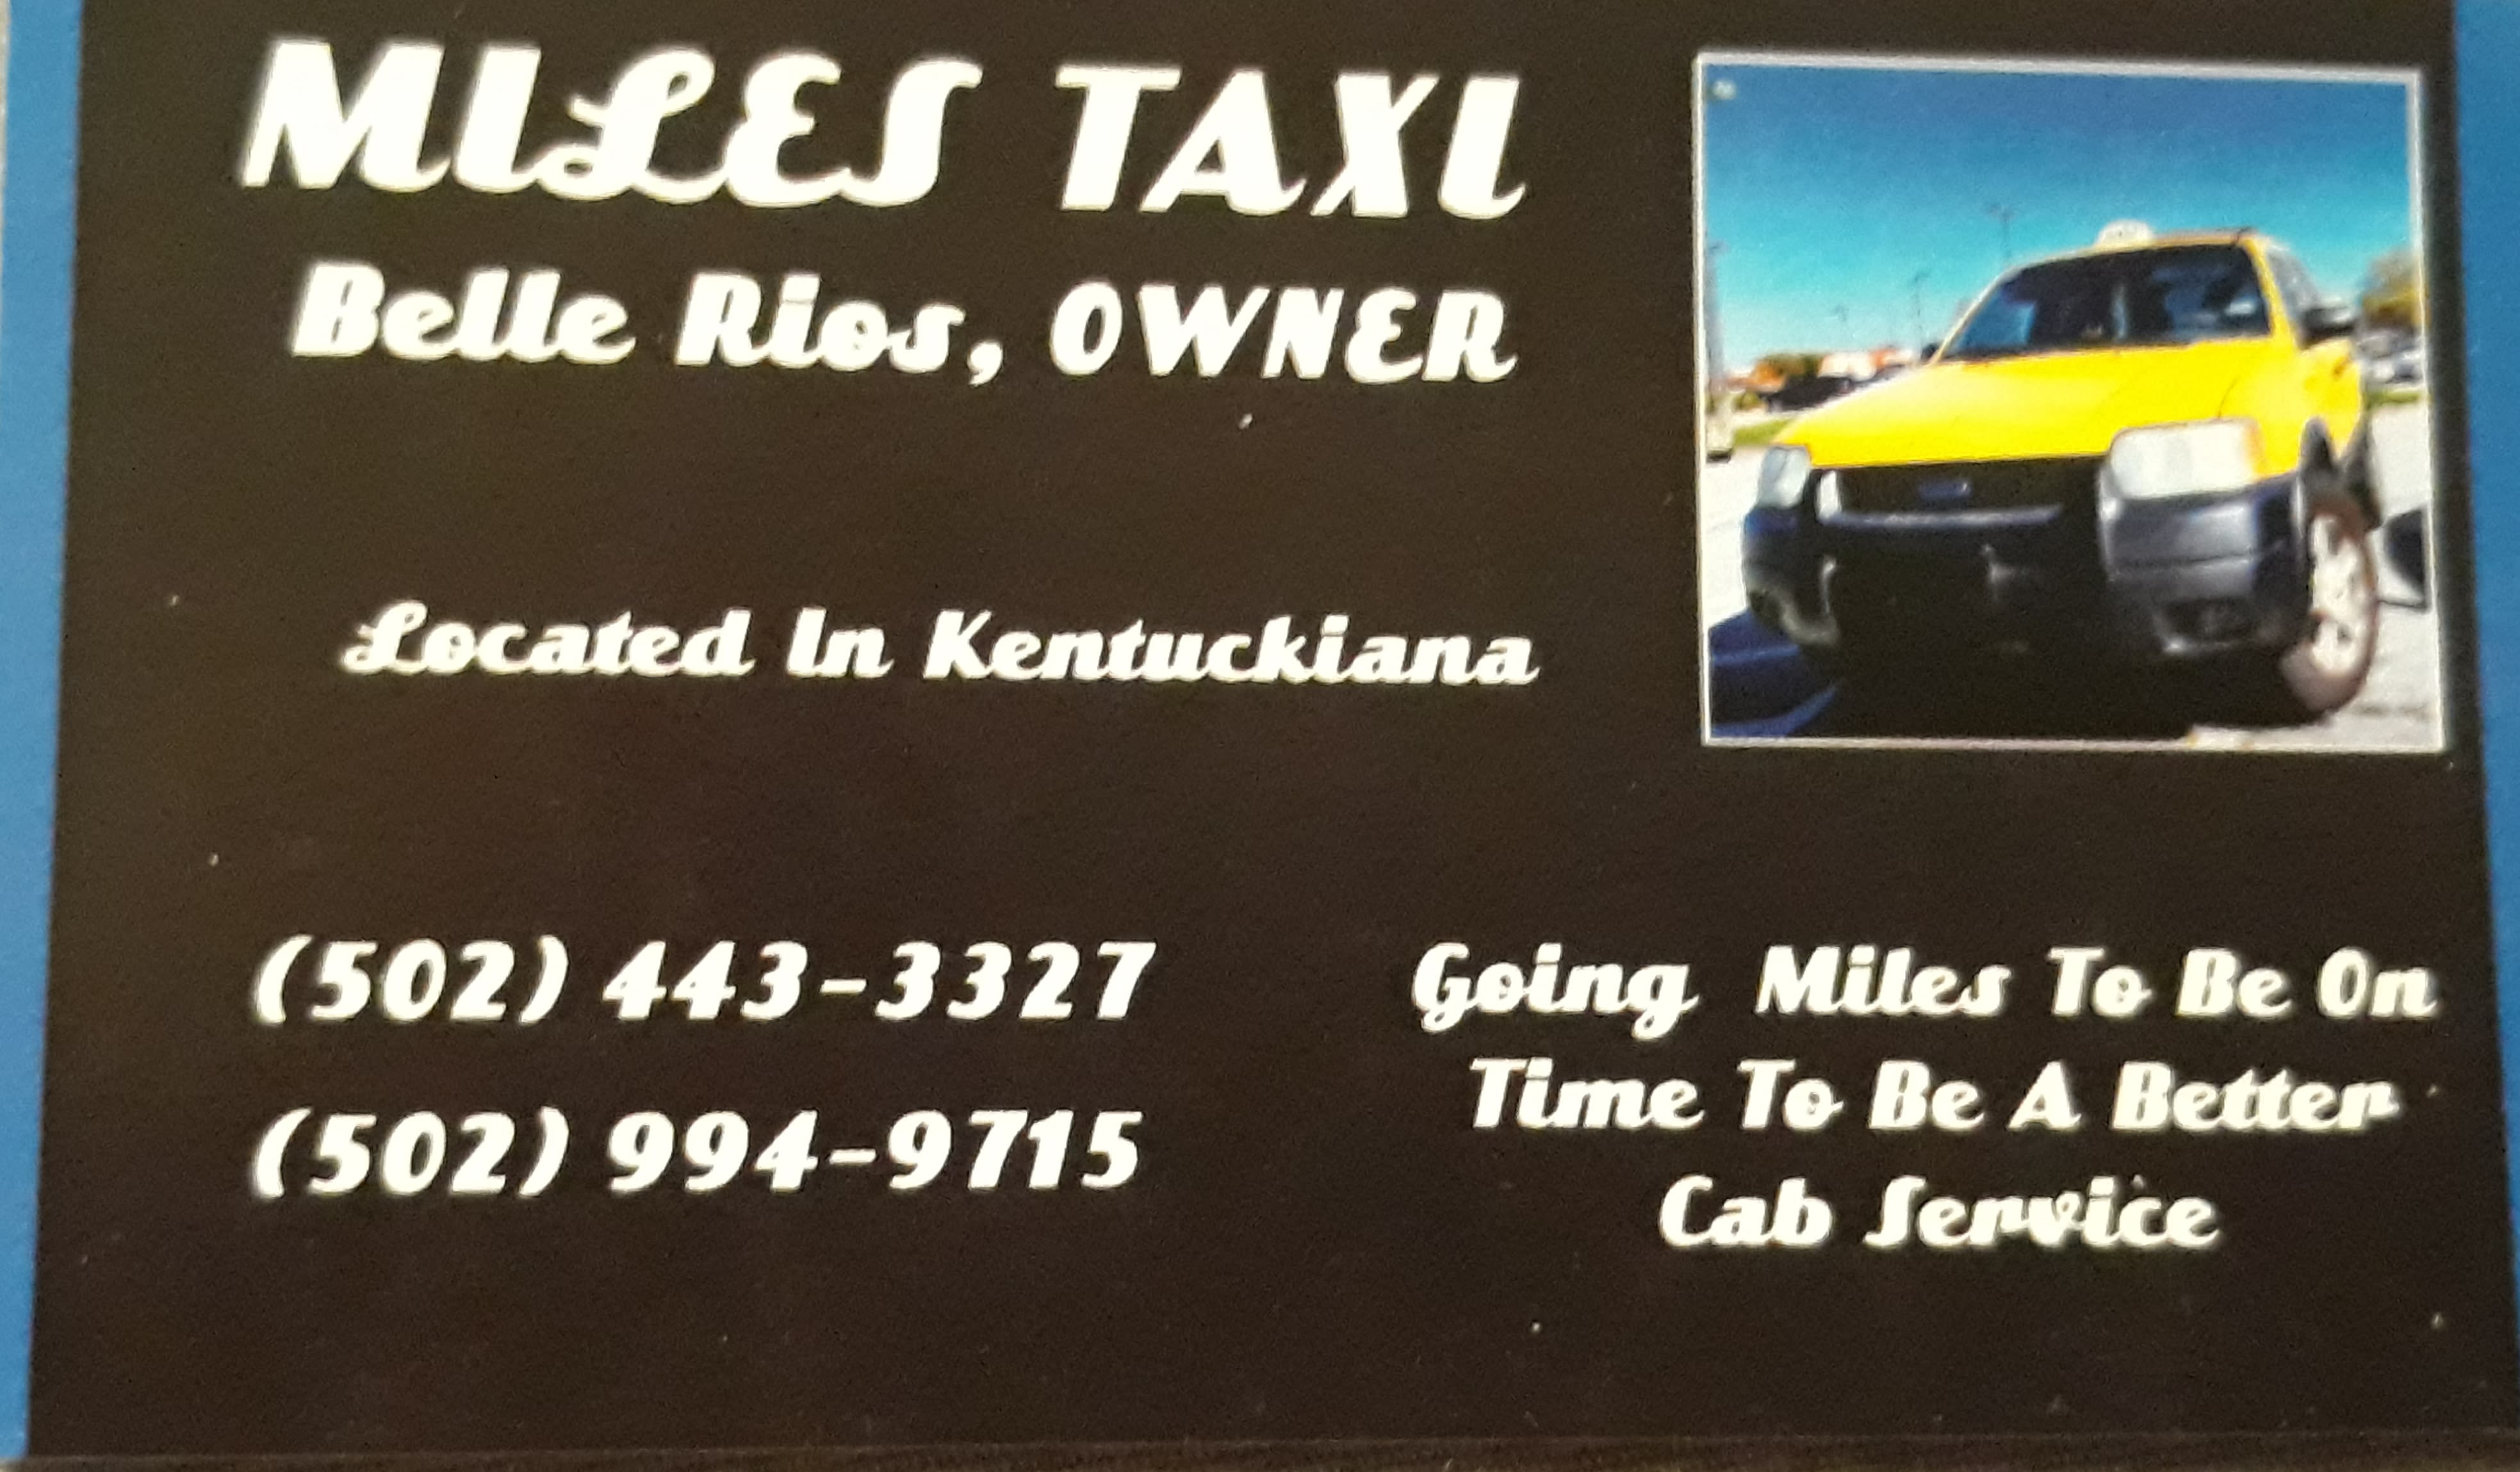 Miles Taxi